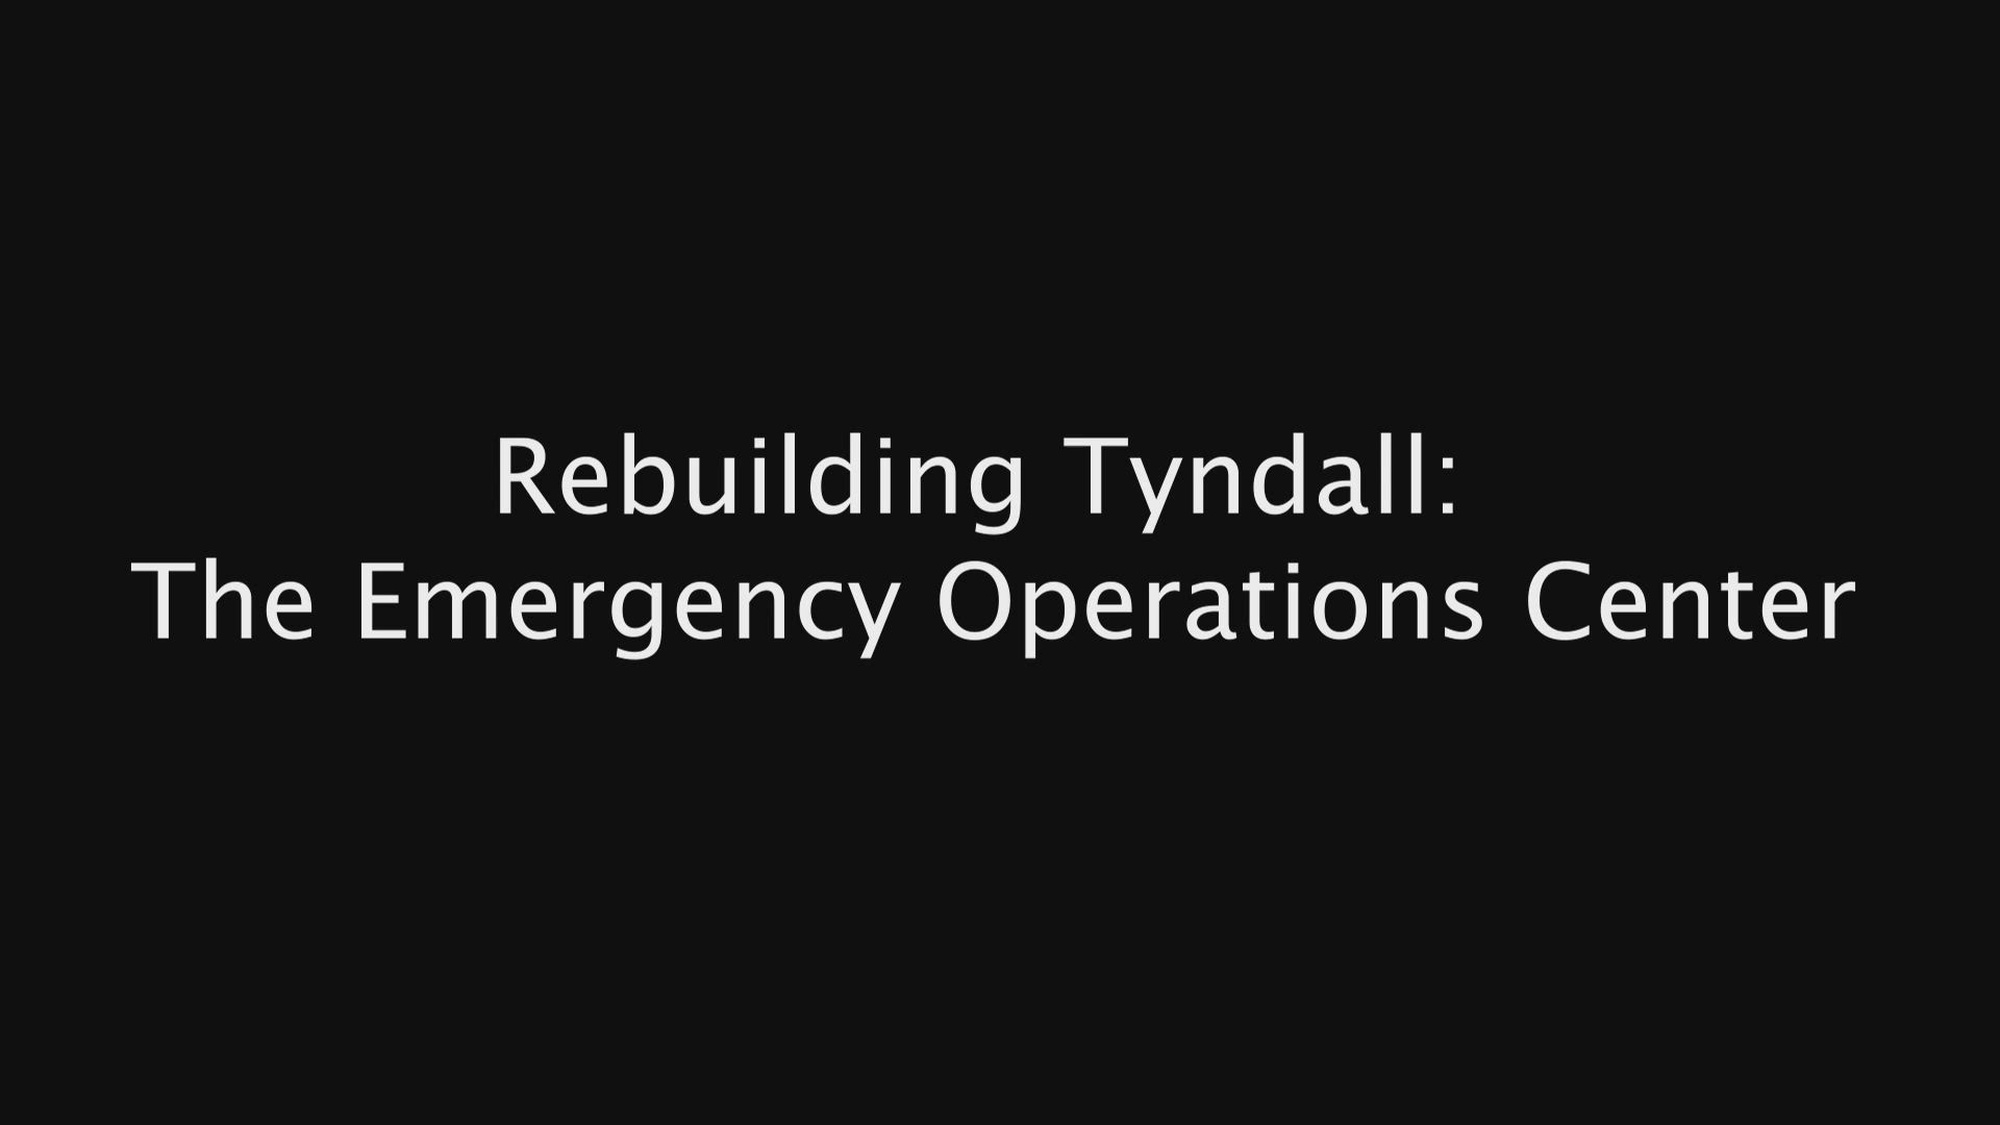 Emergency ops center rebuild at Tyndall Air Force Base.